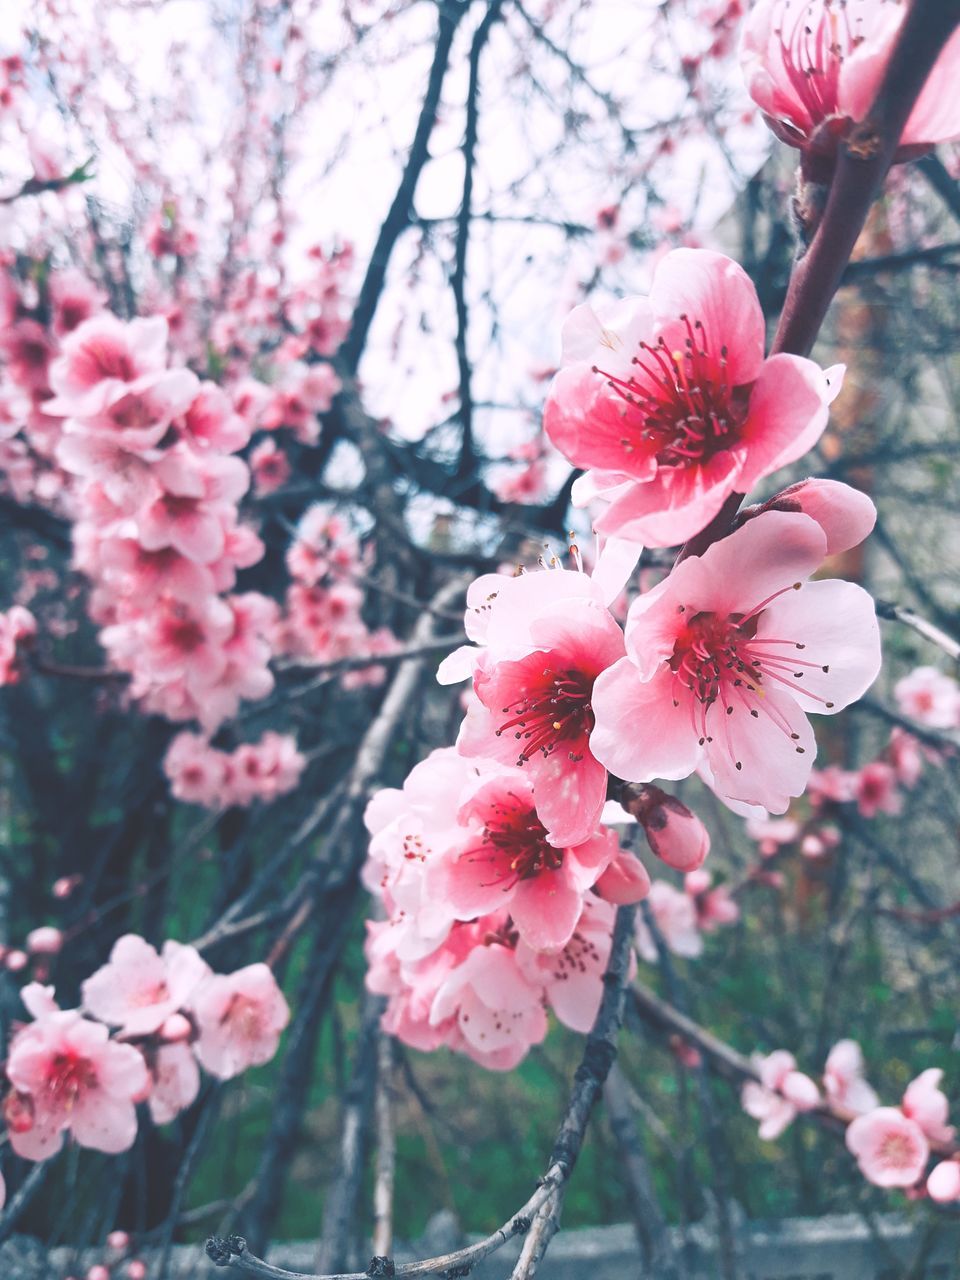 plant, flowering plant, flower, freshness, pink color, beauty in nature, fragility, growth, vulnerability, tree, petal, blossom, close-up, inflorescence, focus on foreground, branch, flower head, springtime, nature, day, no people, cherry blossom, cherry tree, outdoors, pollen, spring